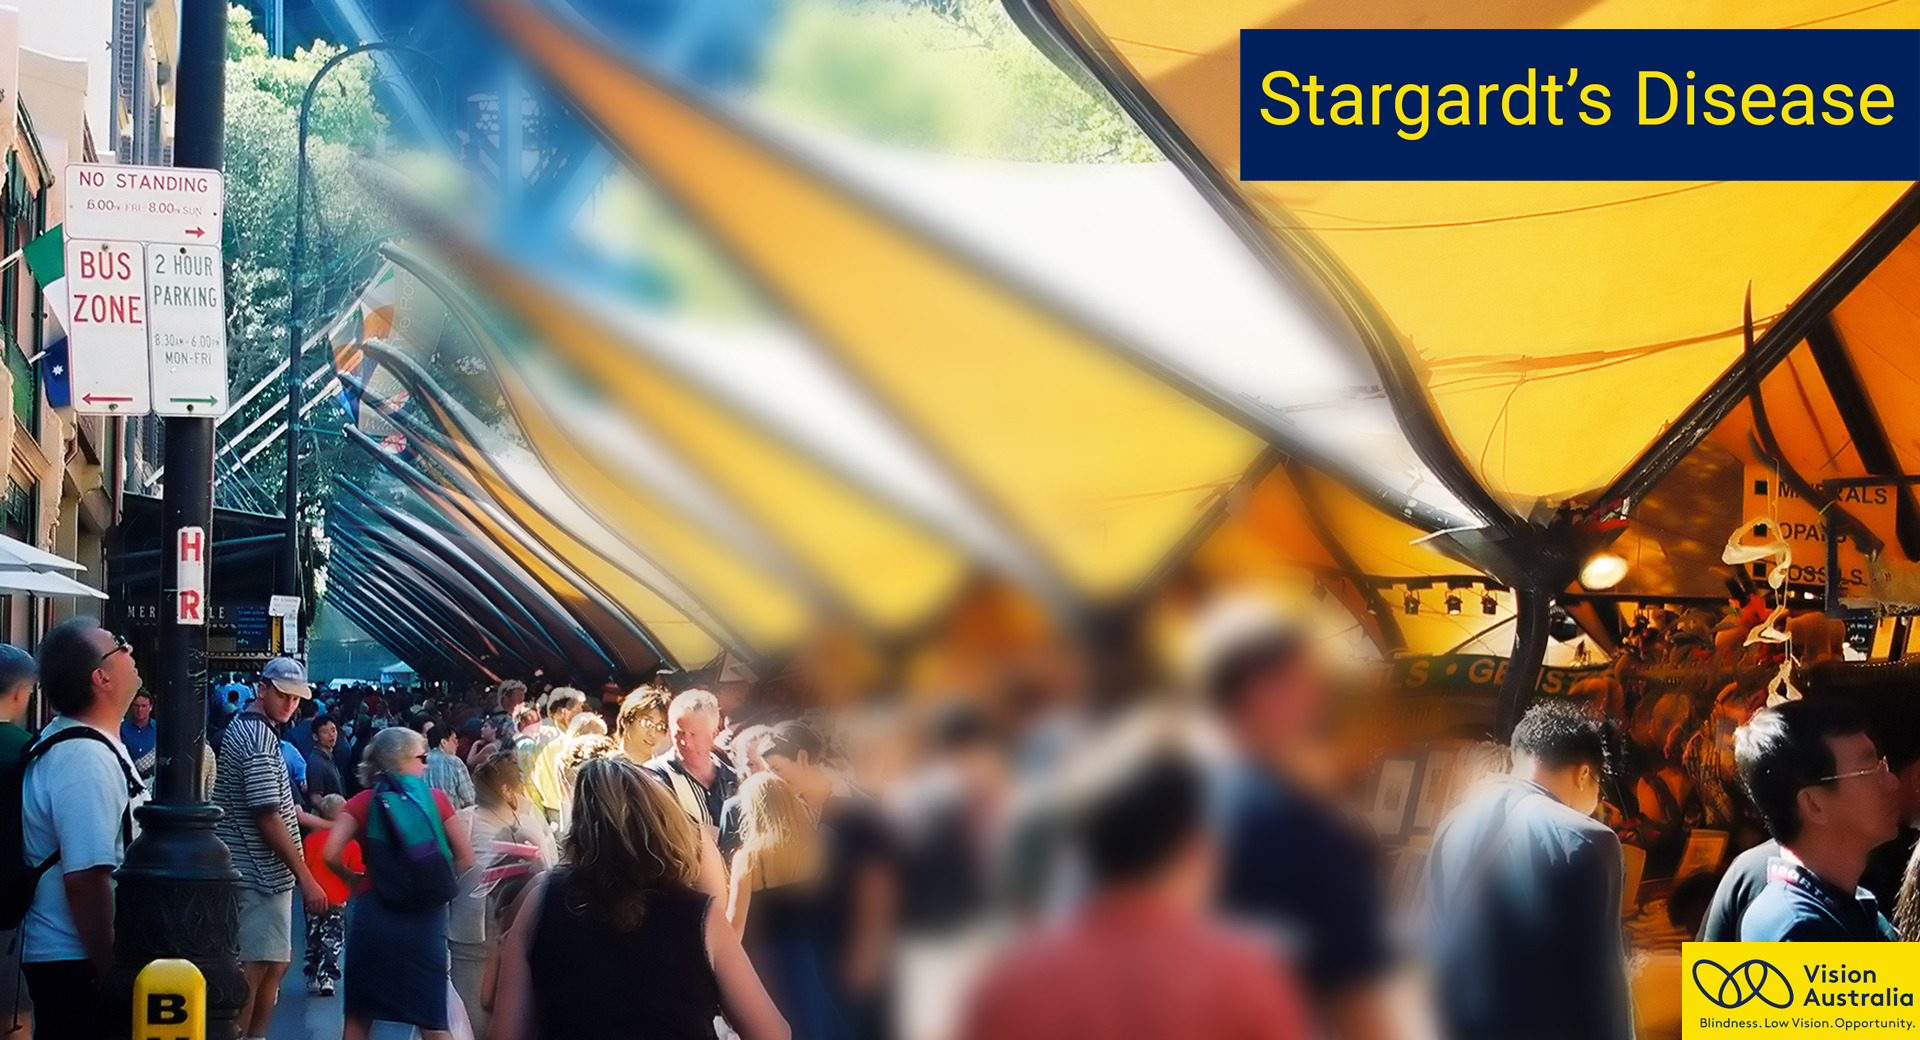 Simulation image of how stargardt's disease affects vision. Scene has middle area blurred.